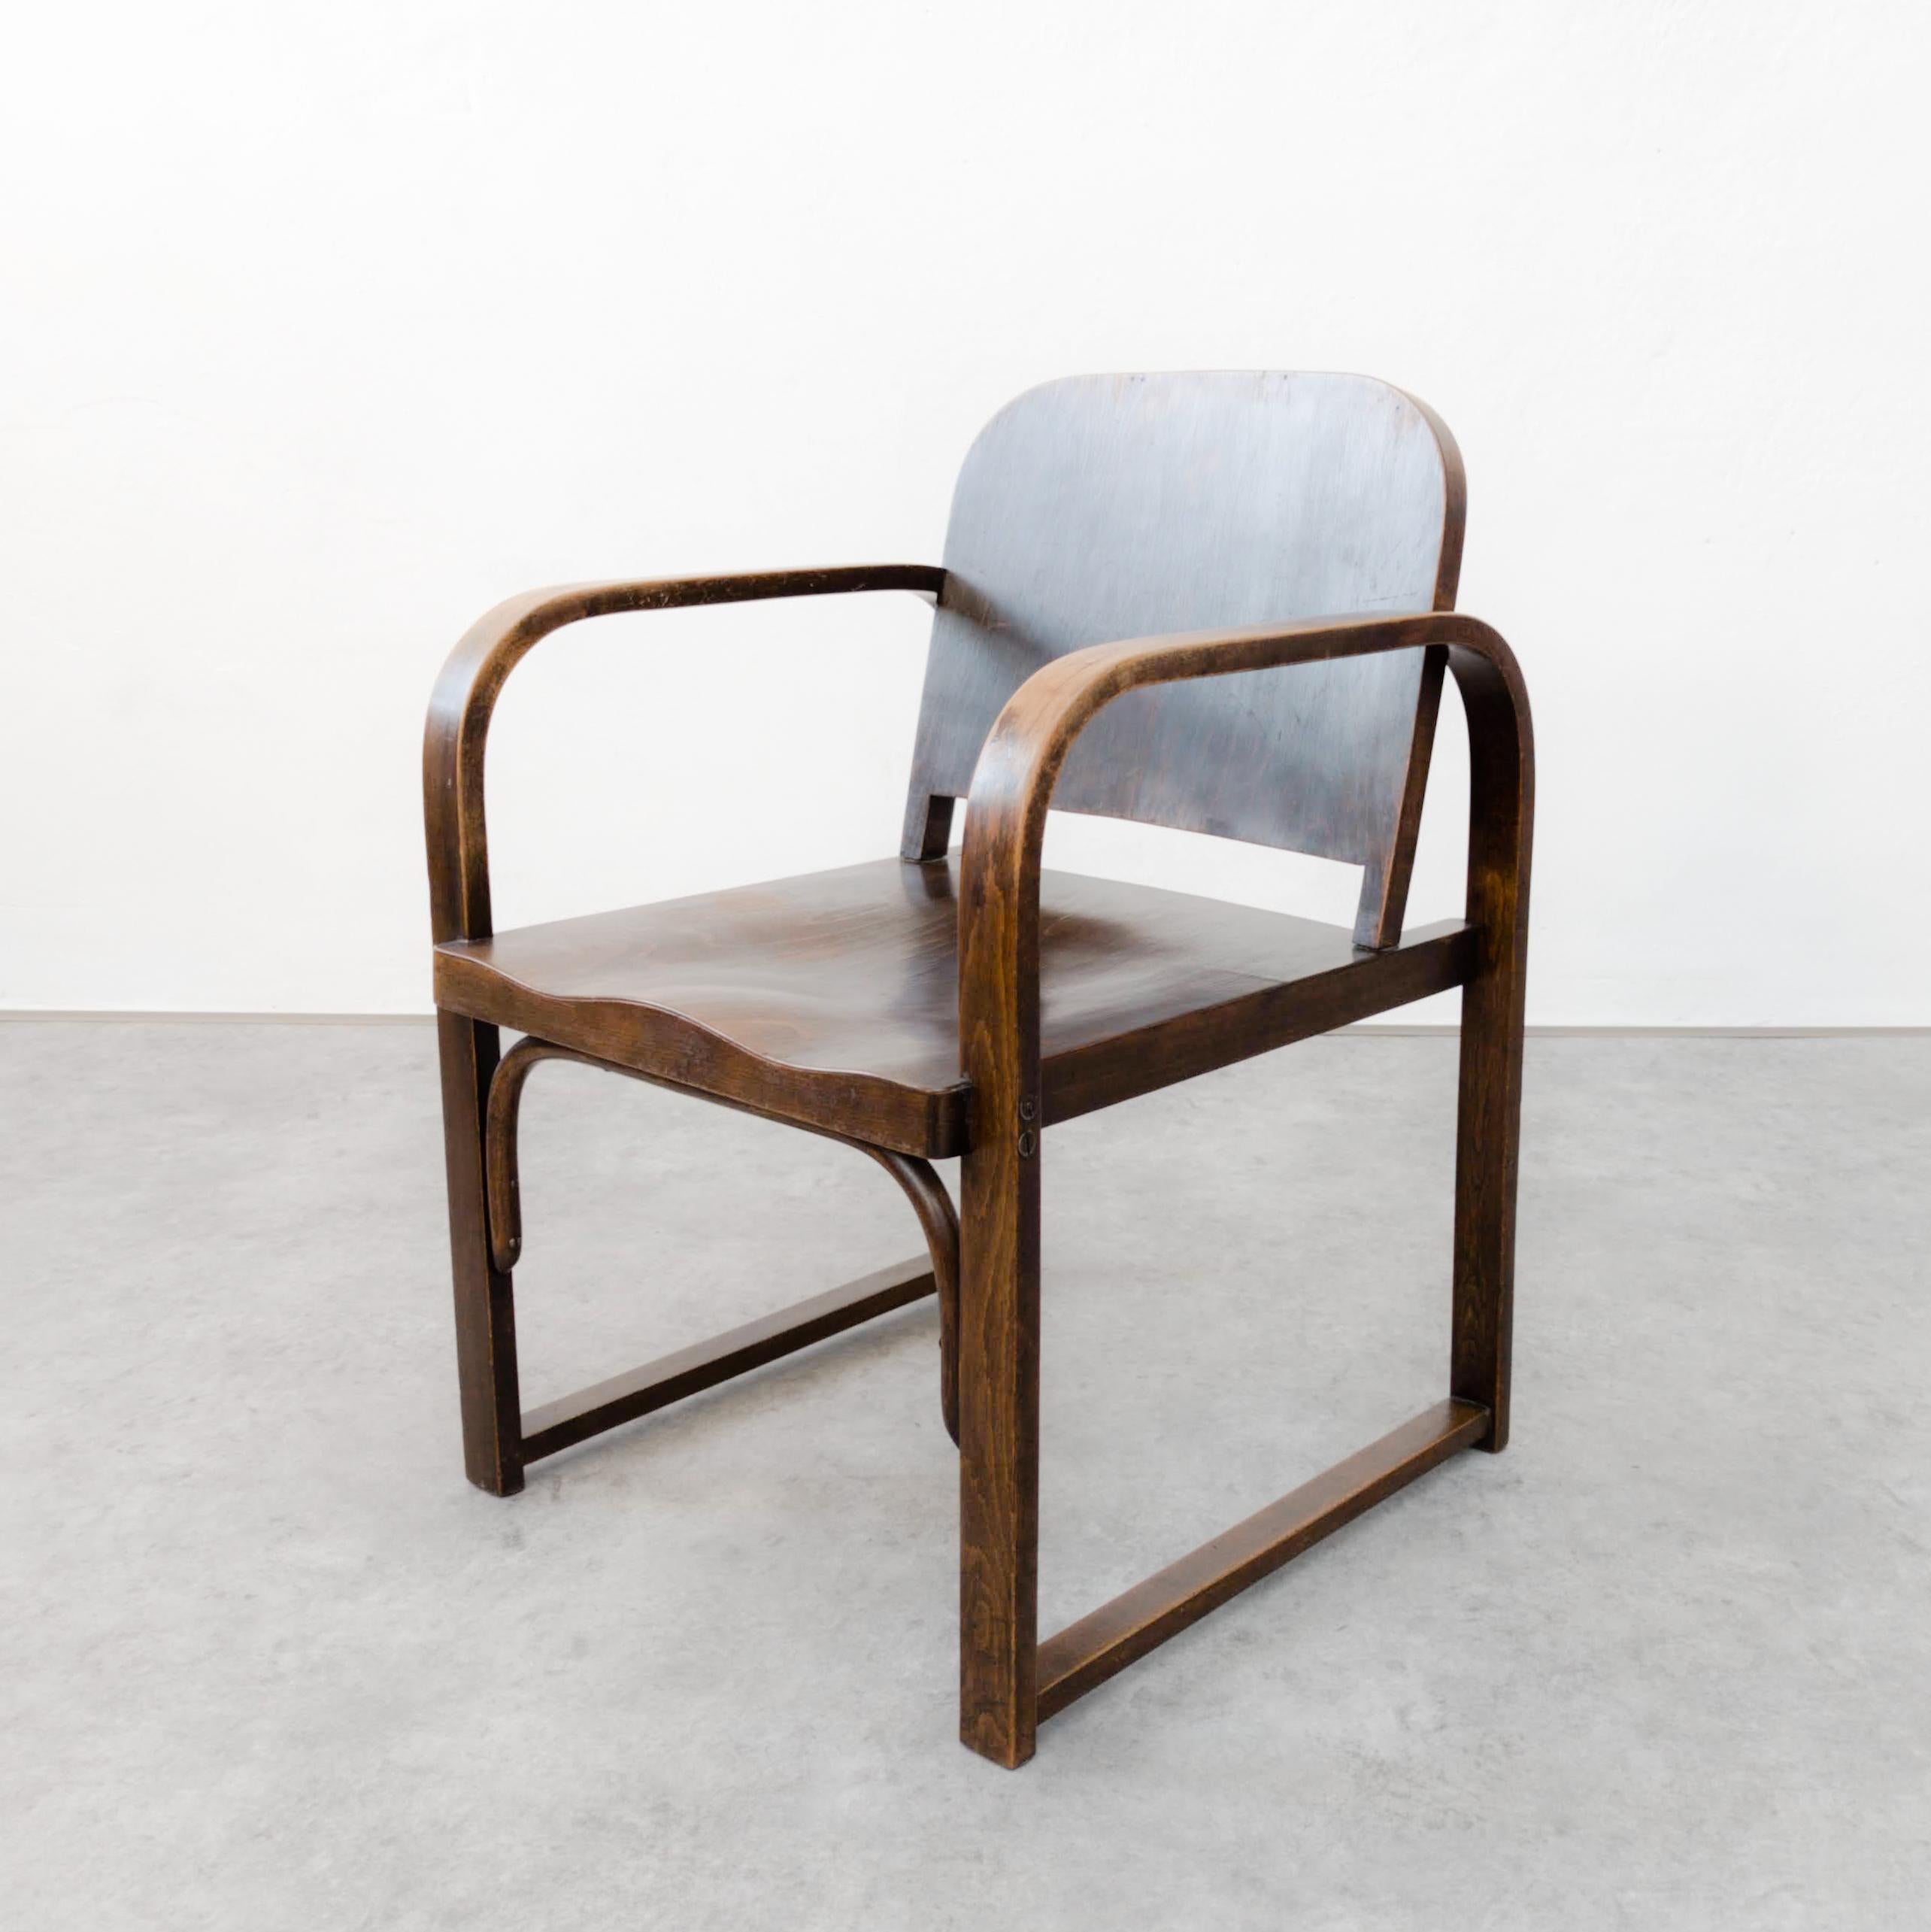 Bentwood avantgarde armchair produced by Tatra Martin, Slovakia under Thonet licence in 1930's. In very good original condition, surface expertly polished. Structurally sound.

